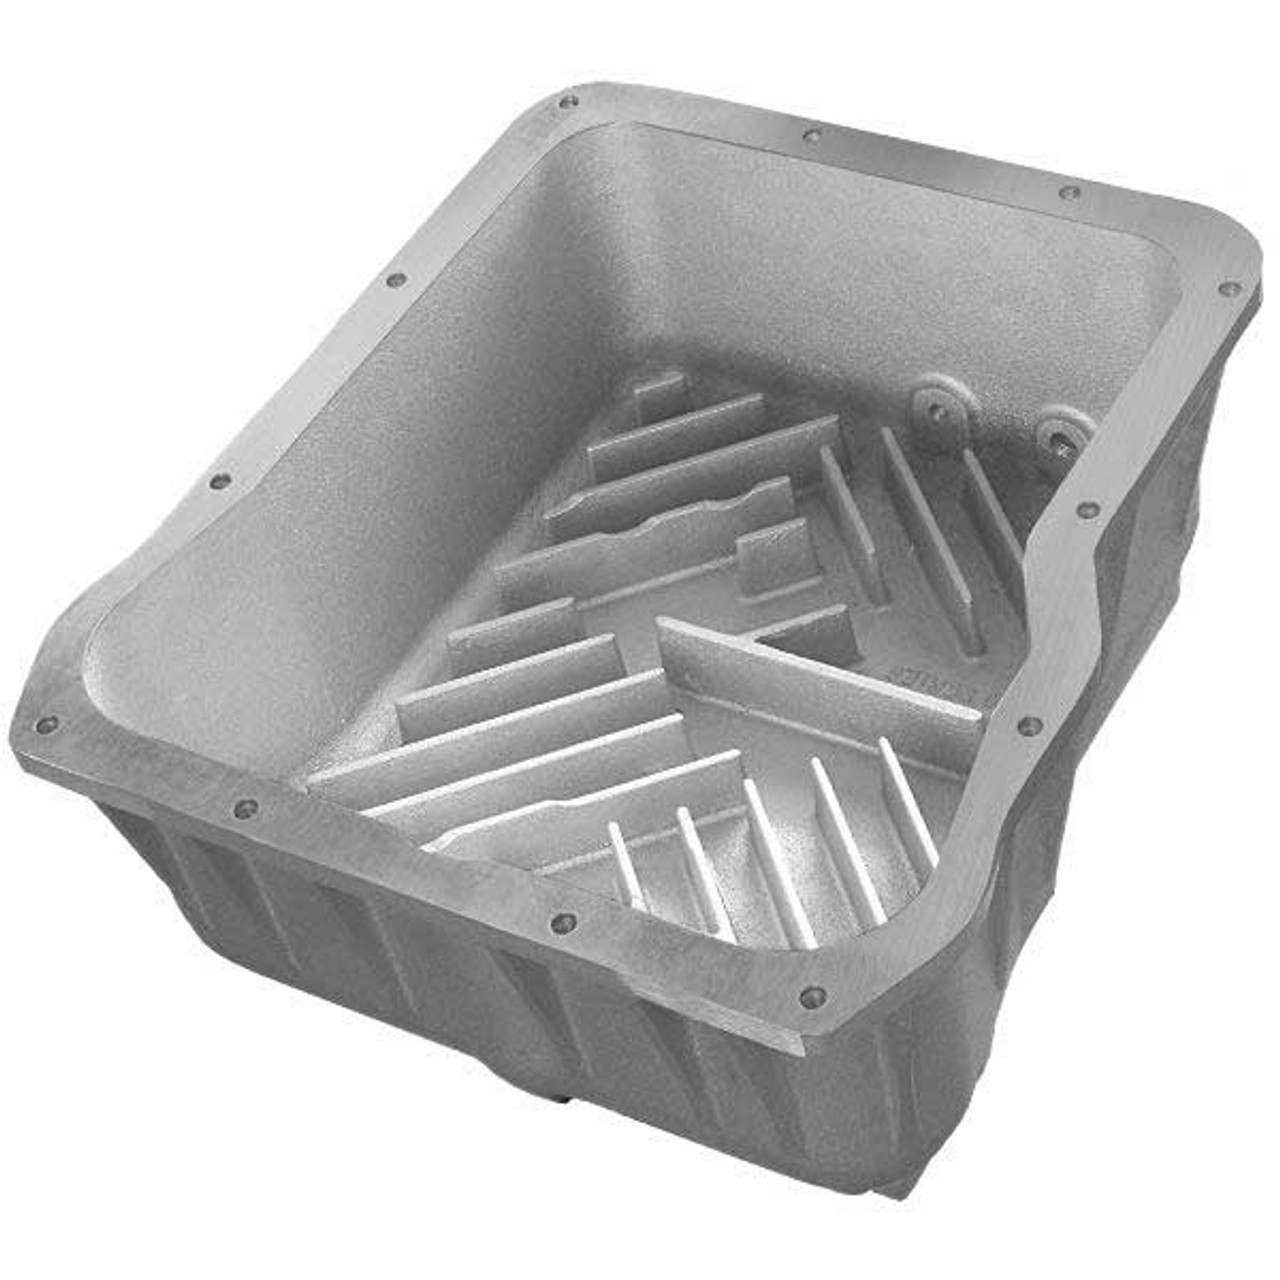 PPE DEEP ALLISON TRANSMISSION PAN - BLACK 2001-2019 GM 6.6L DURAMAX (EQUIPPED WITH ALLISON 1000 / 2000 / 2400) (PPE128051020)In Pan View